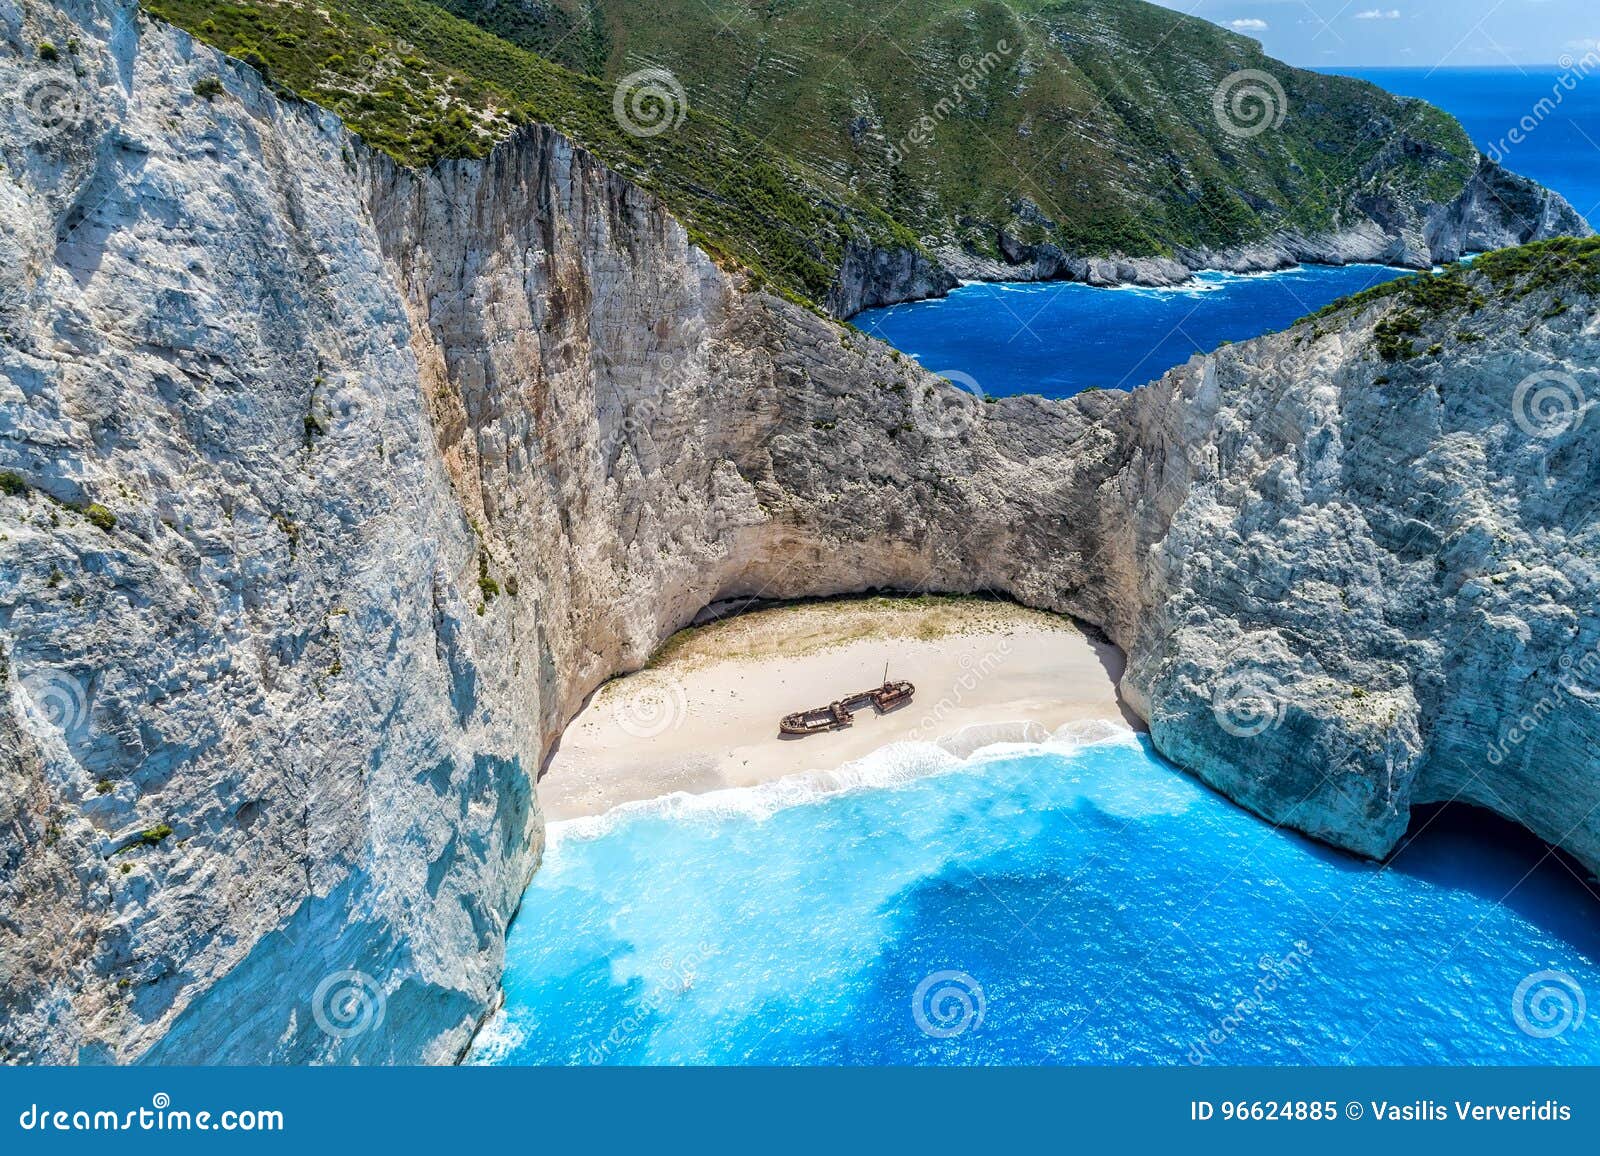 Navagio Shipwreck Beach One Of The Most Famous Beach In The World